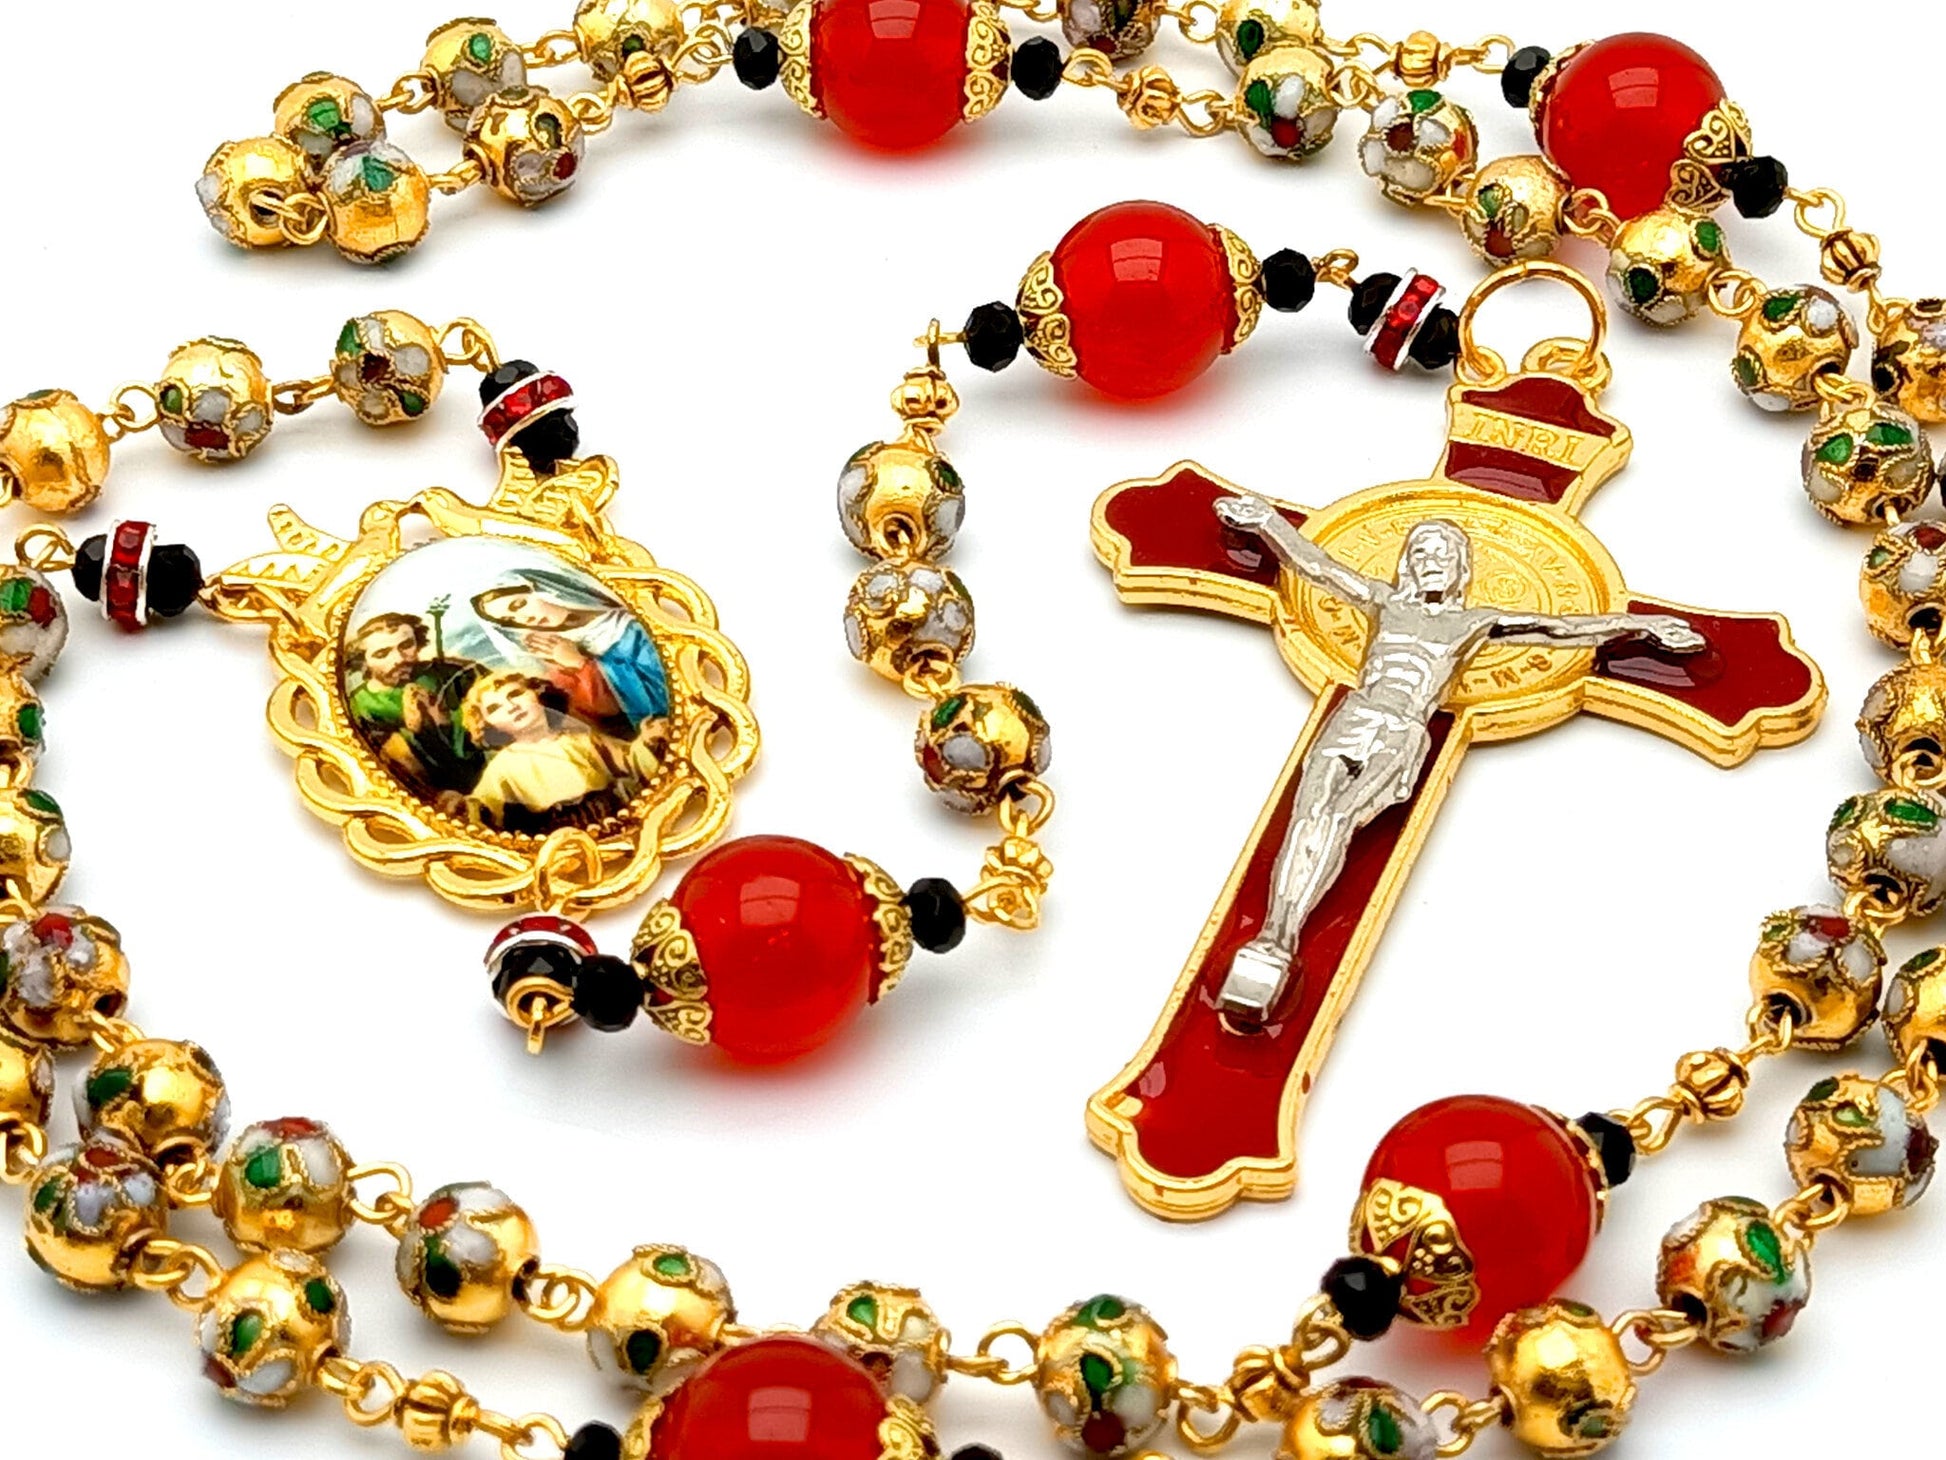 Holy family unique rosary beads with golden cloisonne and red jasper beads, red enamel crucifix and golden picture centre medal.